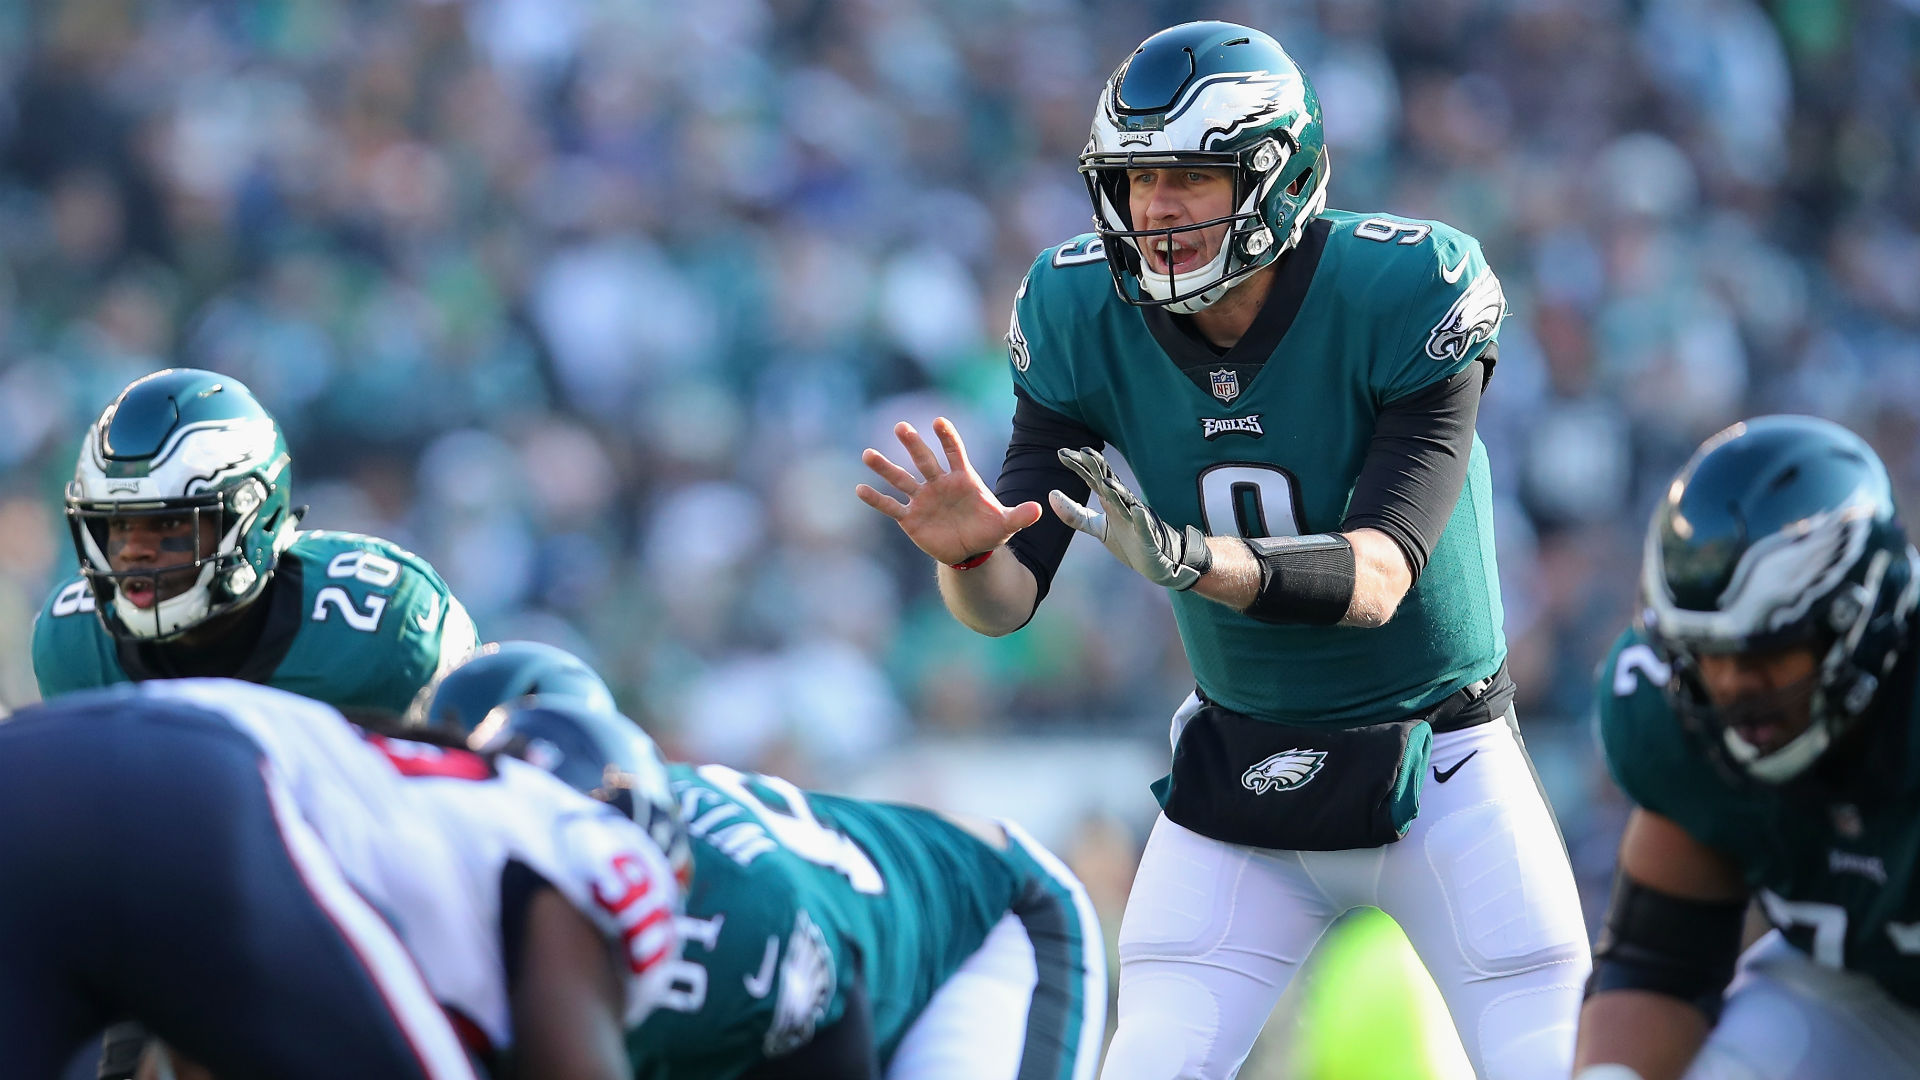 Report: Nick Foles won't be back with Eagles next year | Sporting News1920 x 1080